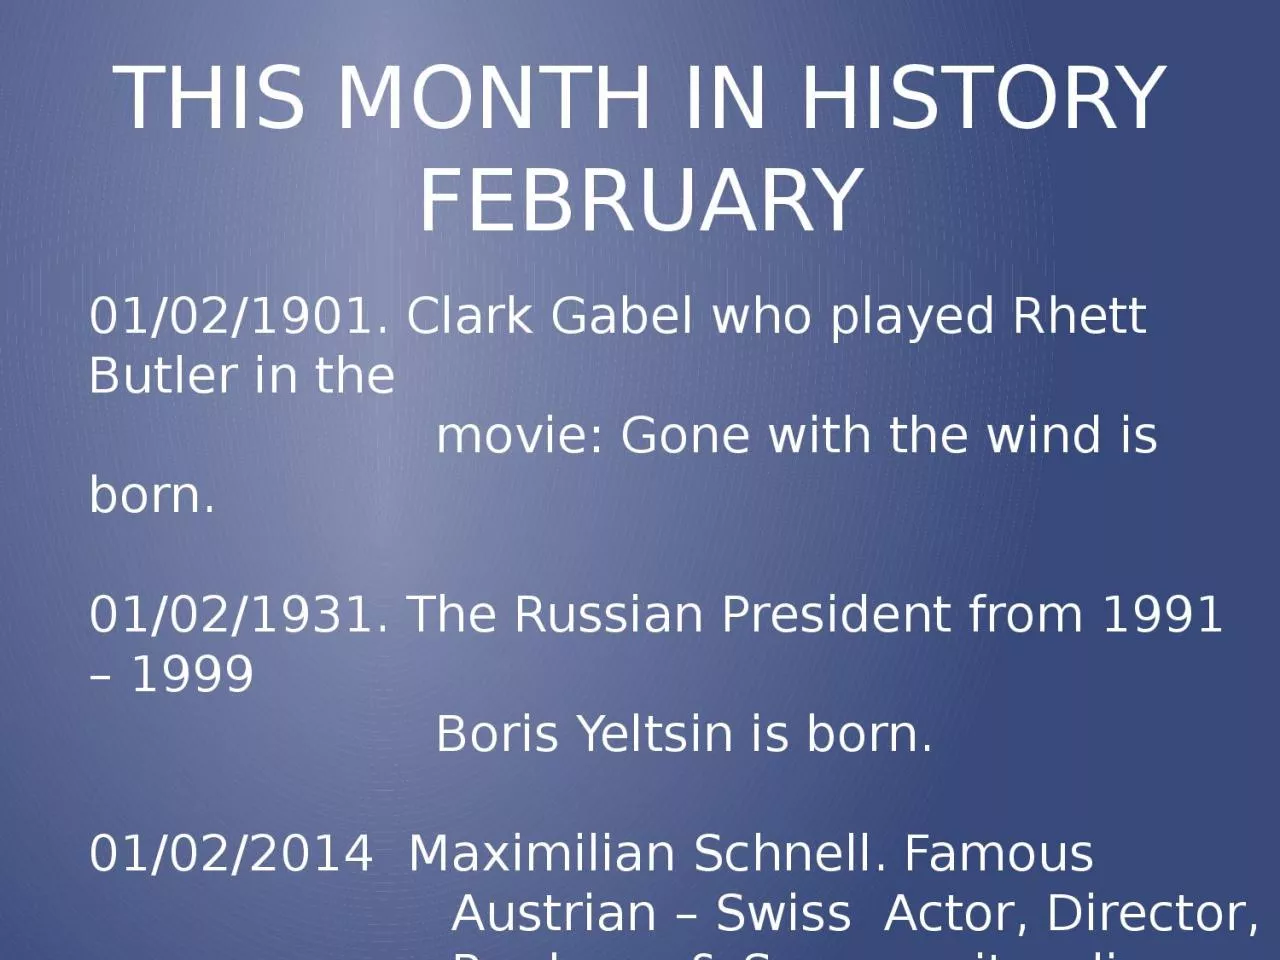 THIS MONTH IN HISTORY FEBRUARY